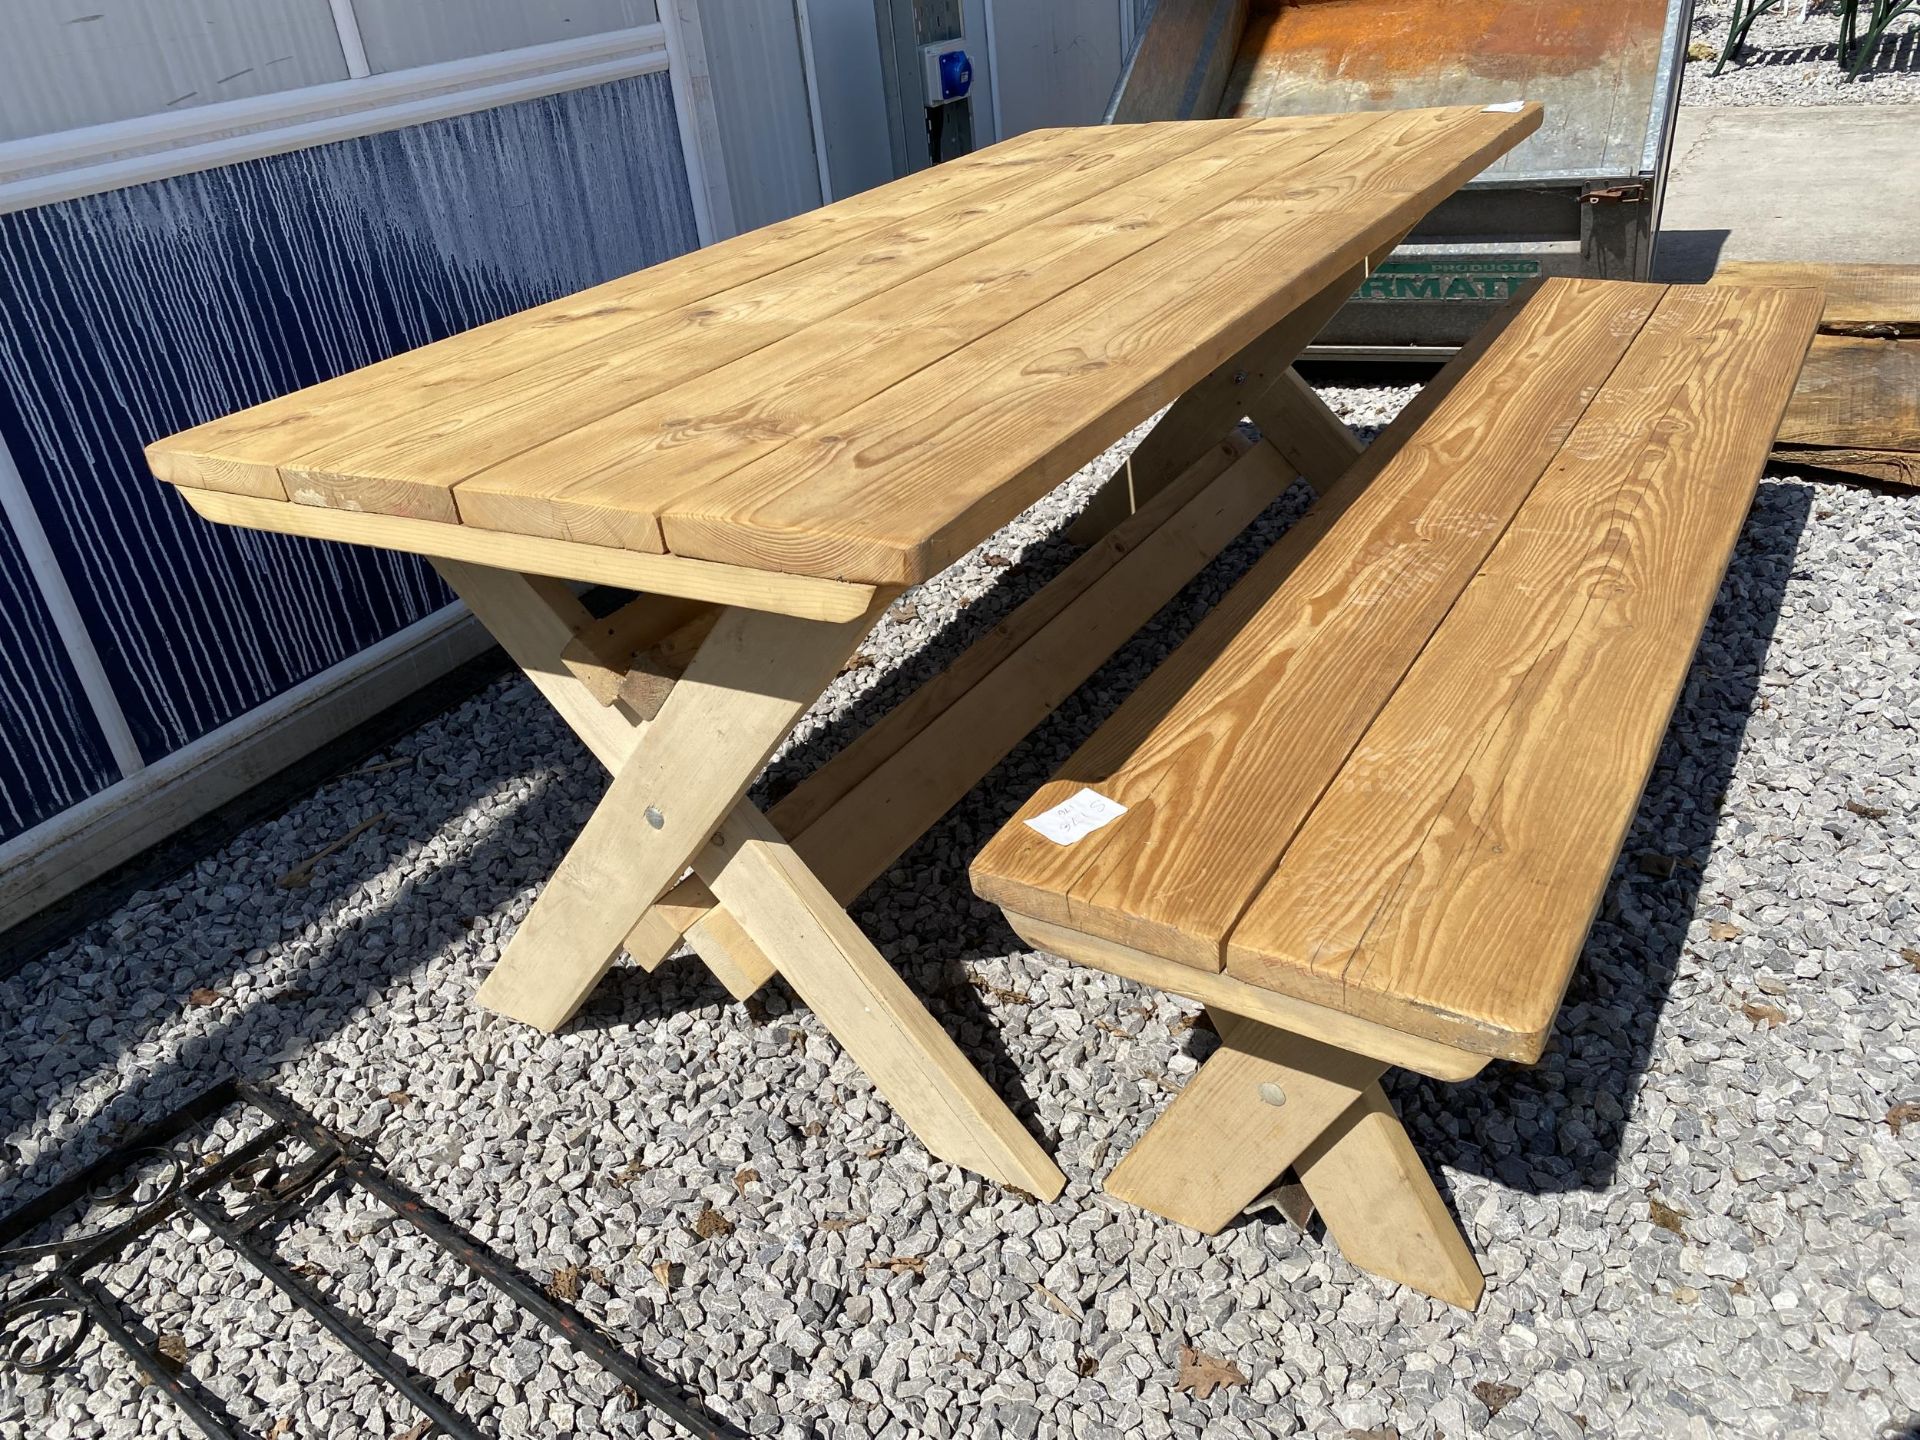 A HARDWOOD DINING TABLE AND BENCH